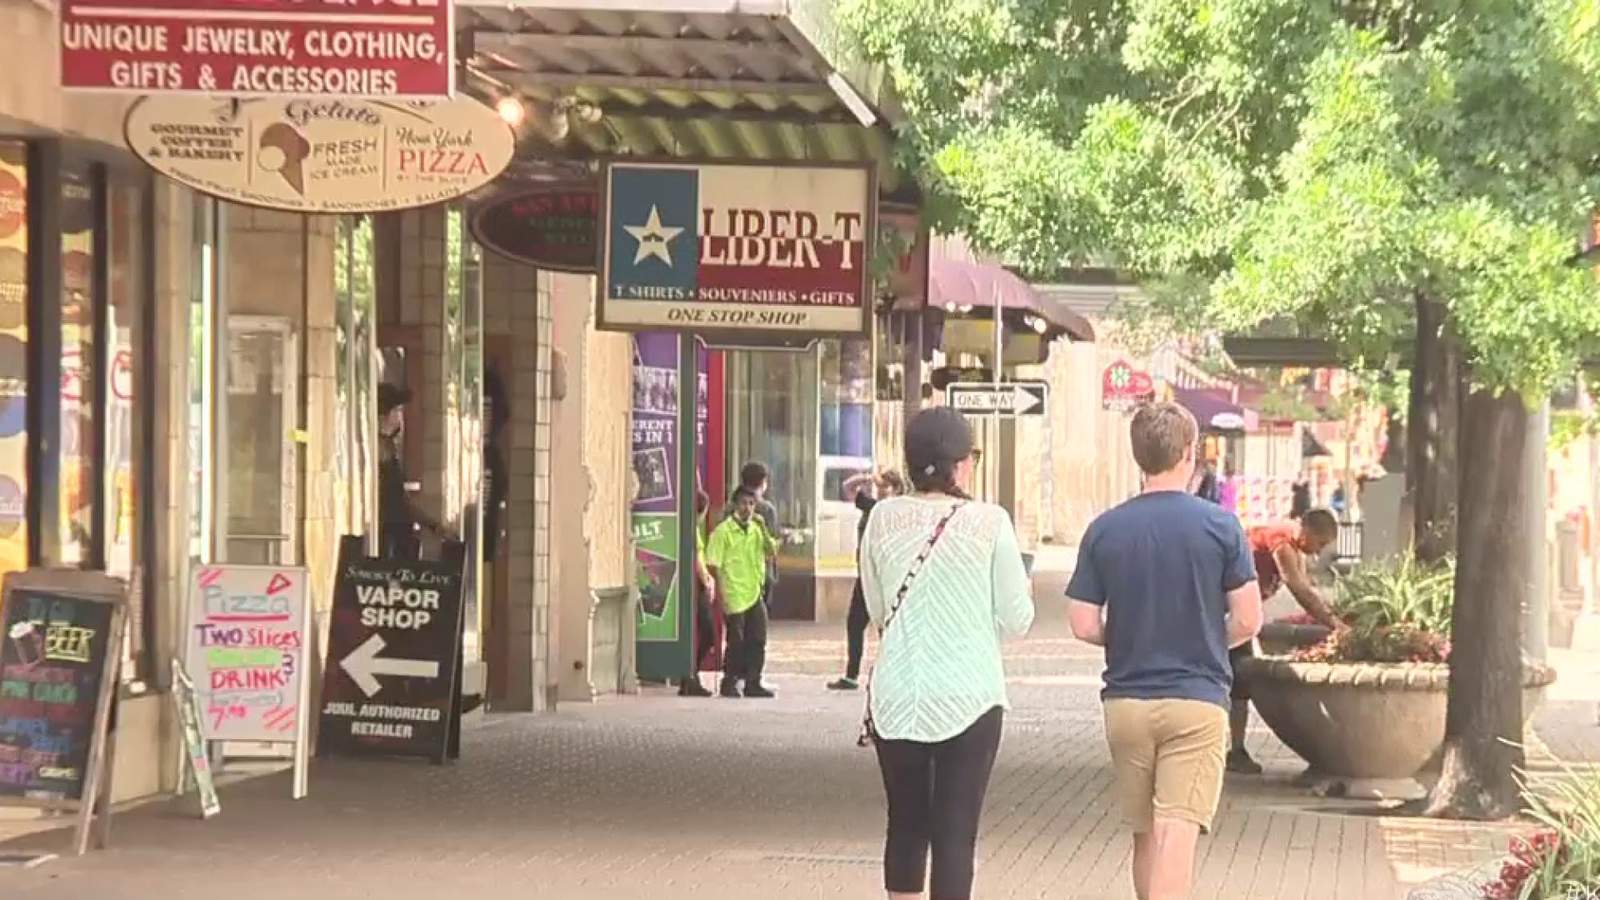 Downtown businesses dealing with impacts from unrest, COVID-19